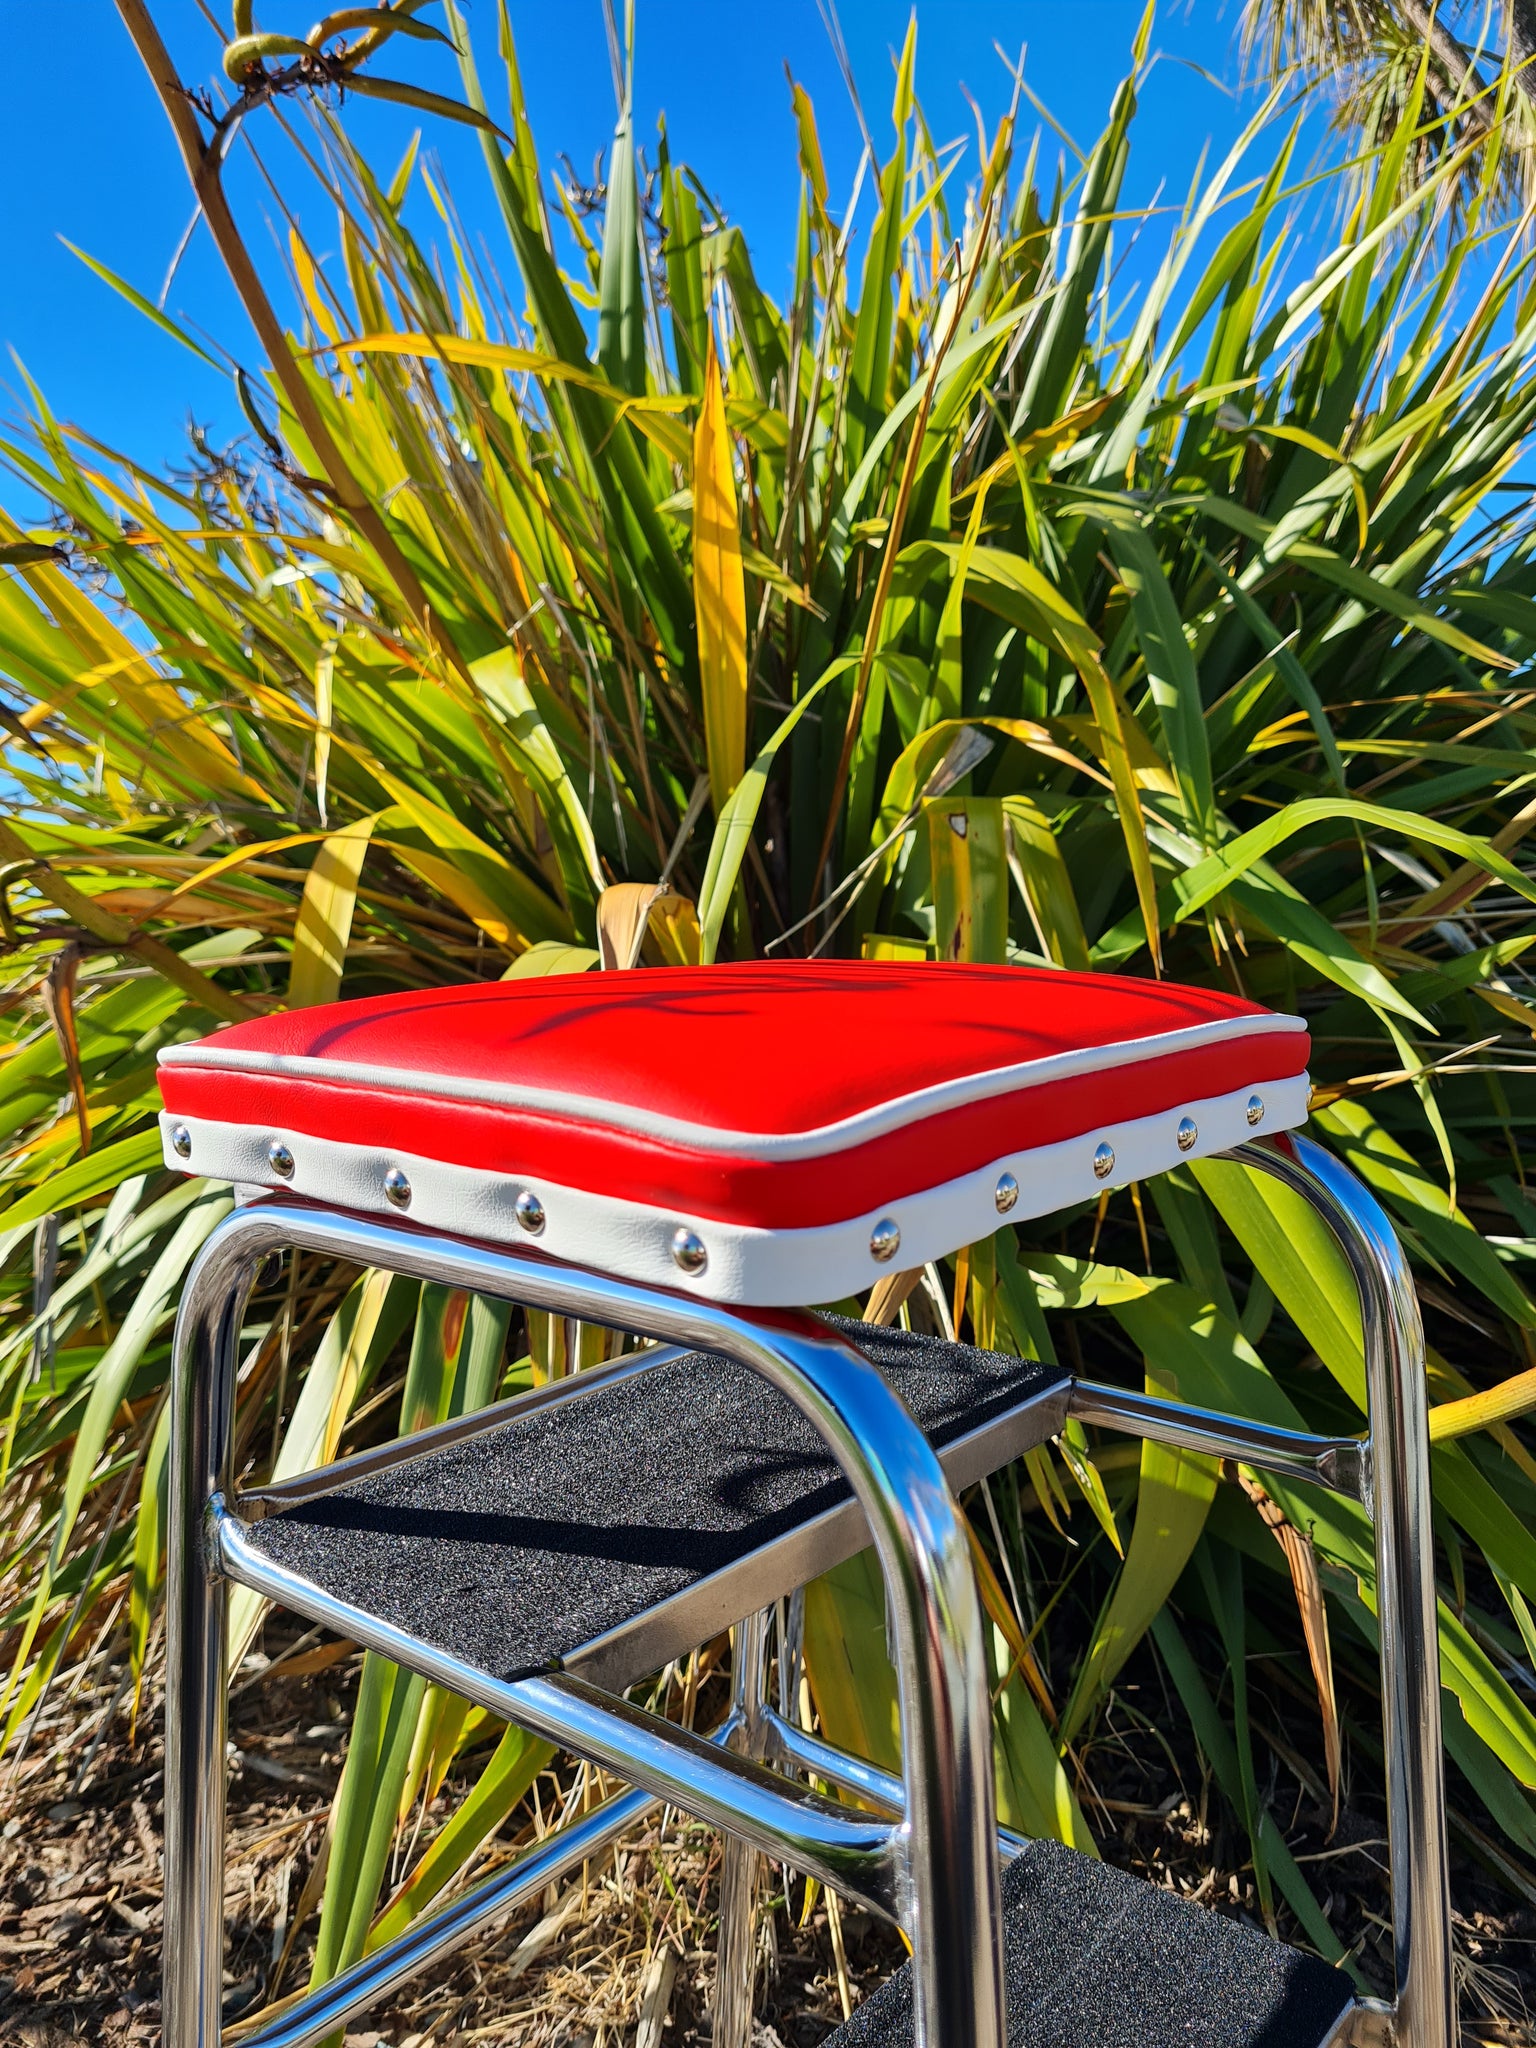 Retro Chrome Step Stool - Seat - Red with White Piping